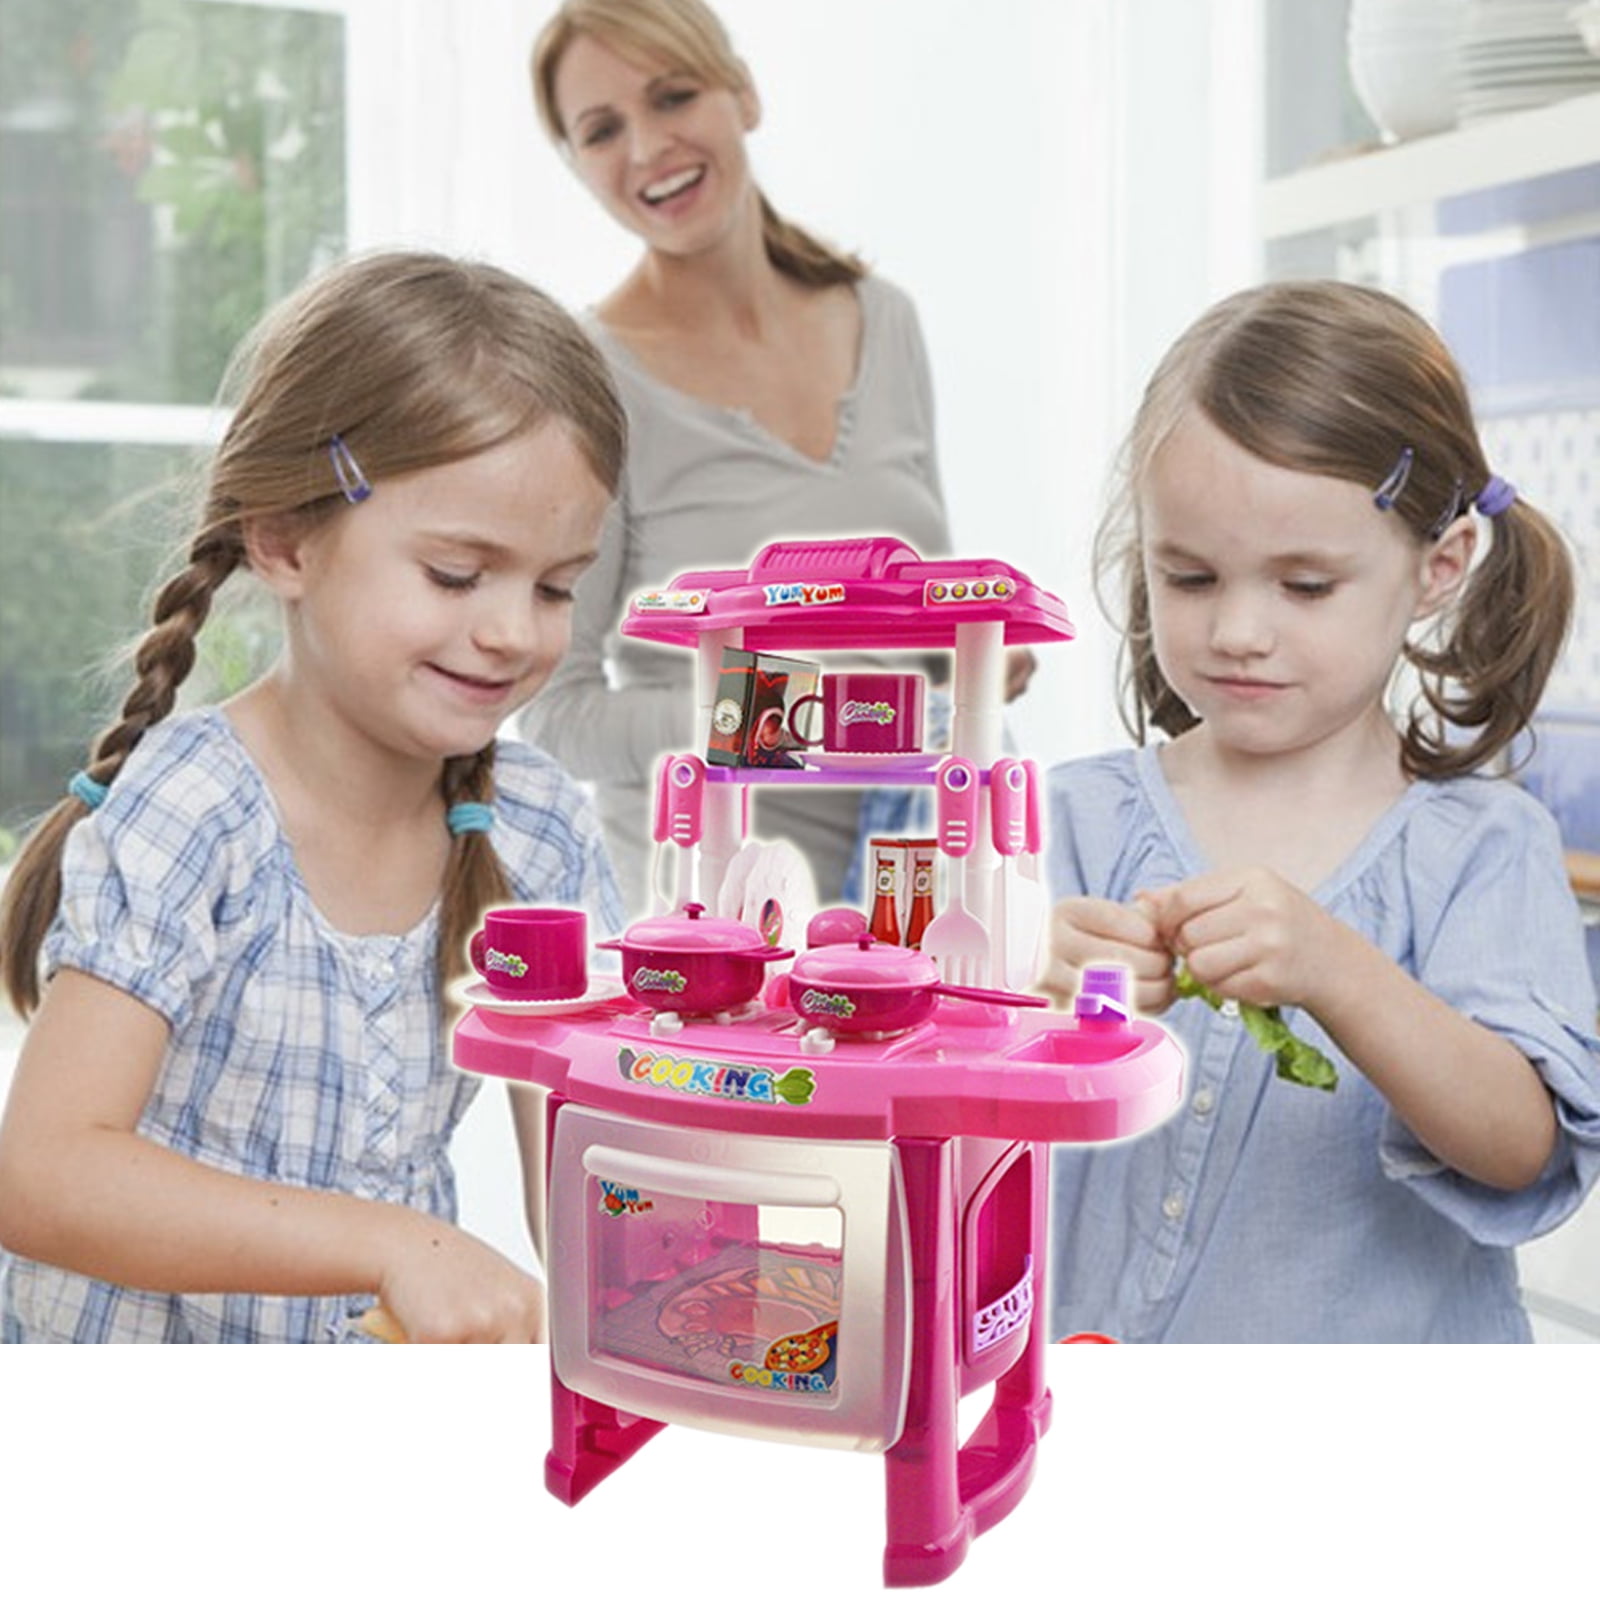 Kids Children's Kitchen Play set Pink Cooking Toddler Infant Baby Toy Gift 